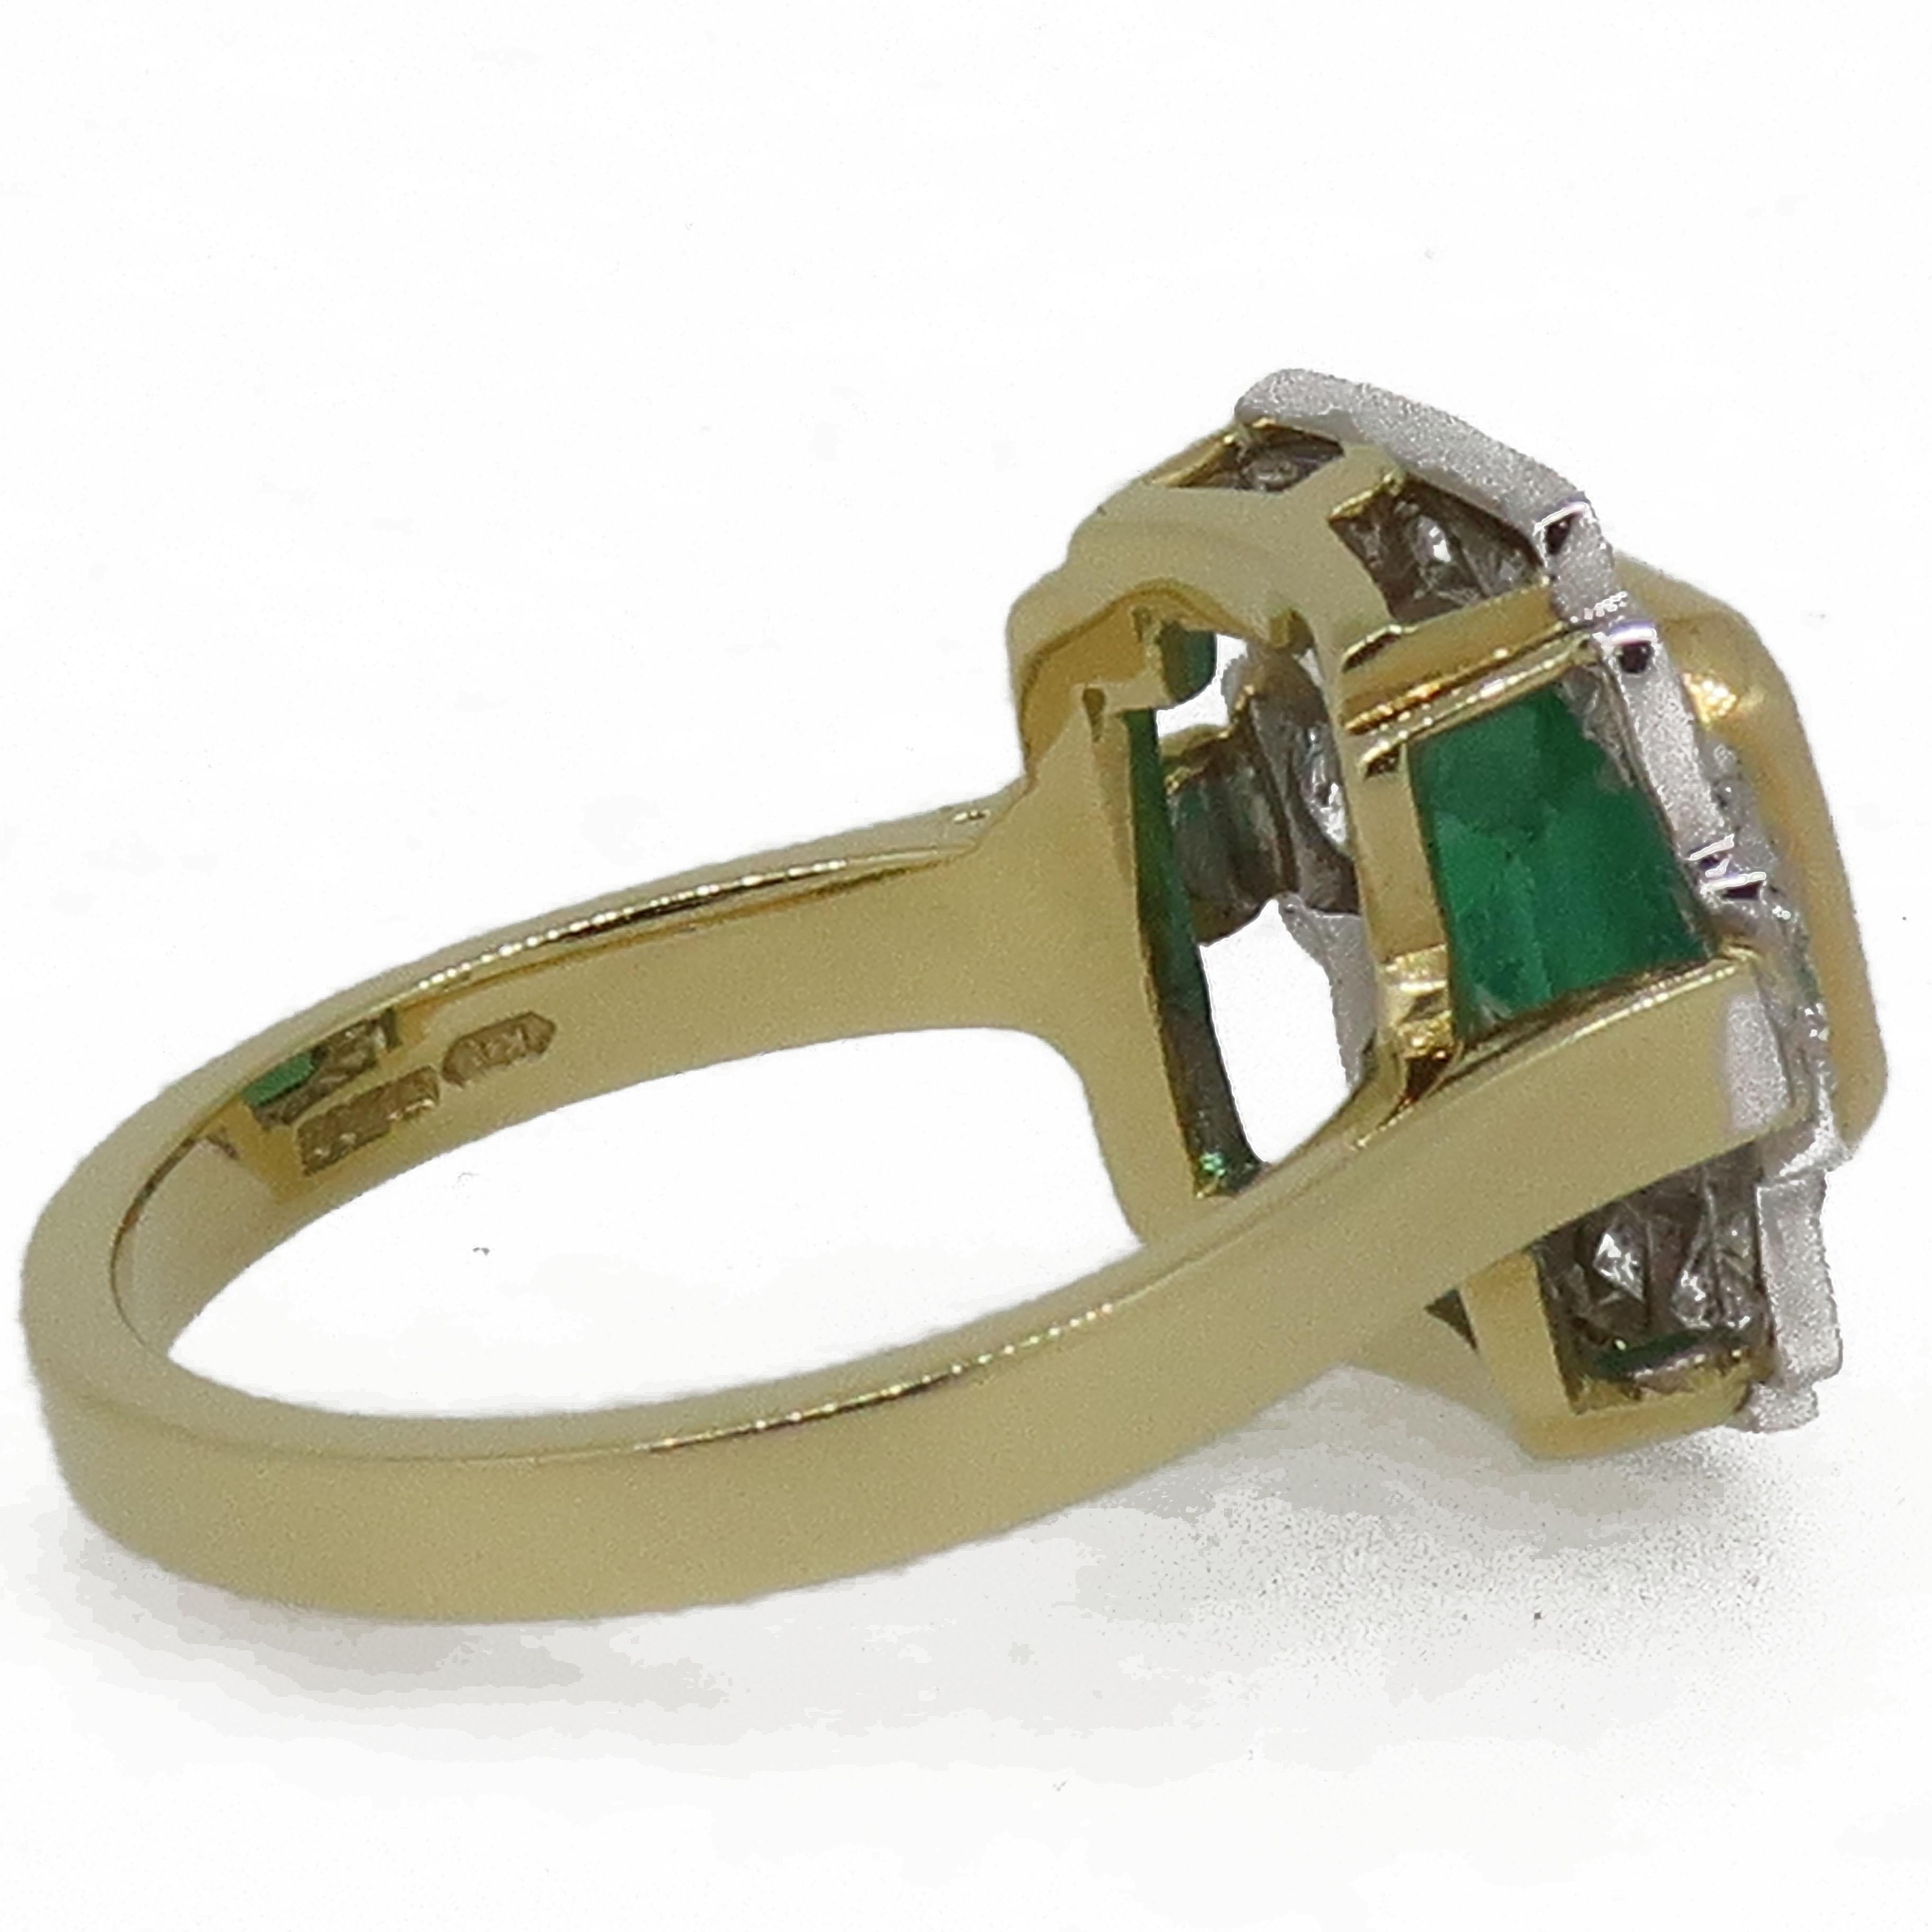 18 Karat Gold Square Emerald Cut Emerald & Diamond Art Deco Style Cluster Ring.

A striking square emerald-cut green Brazilian emerald set in a fine yellow gold bezel weighing 1.89ct, surrounded by twelve round brilliant cut diamonds all set in a